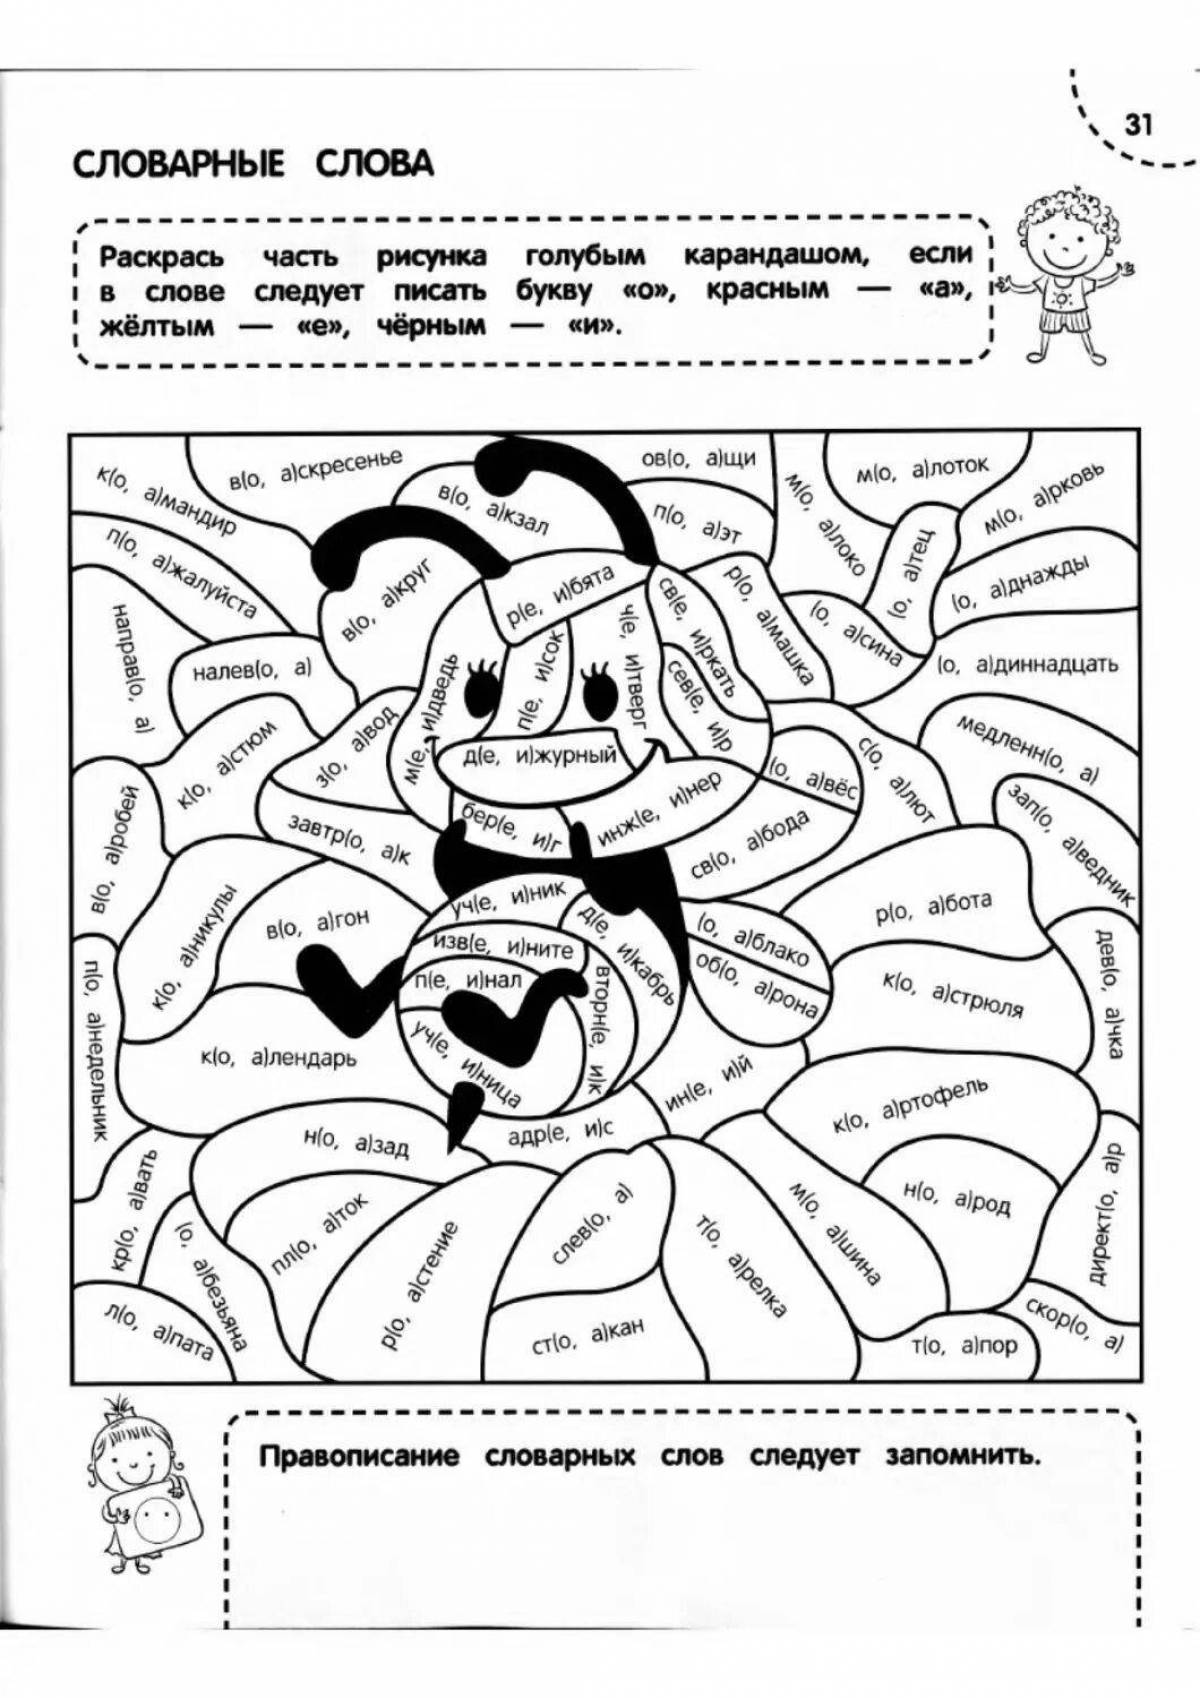 Coloring page for funny spellings